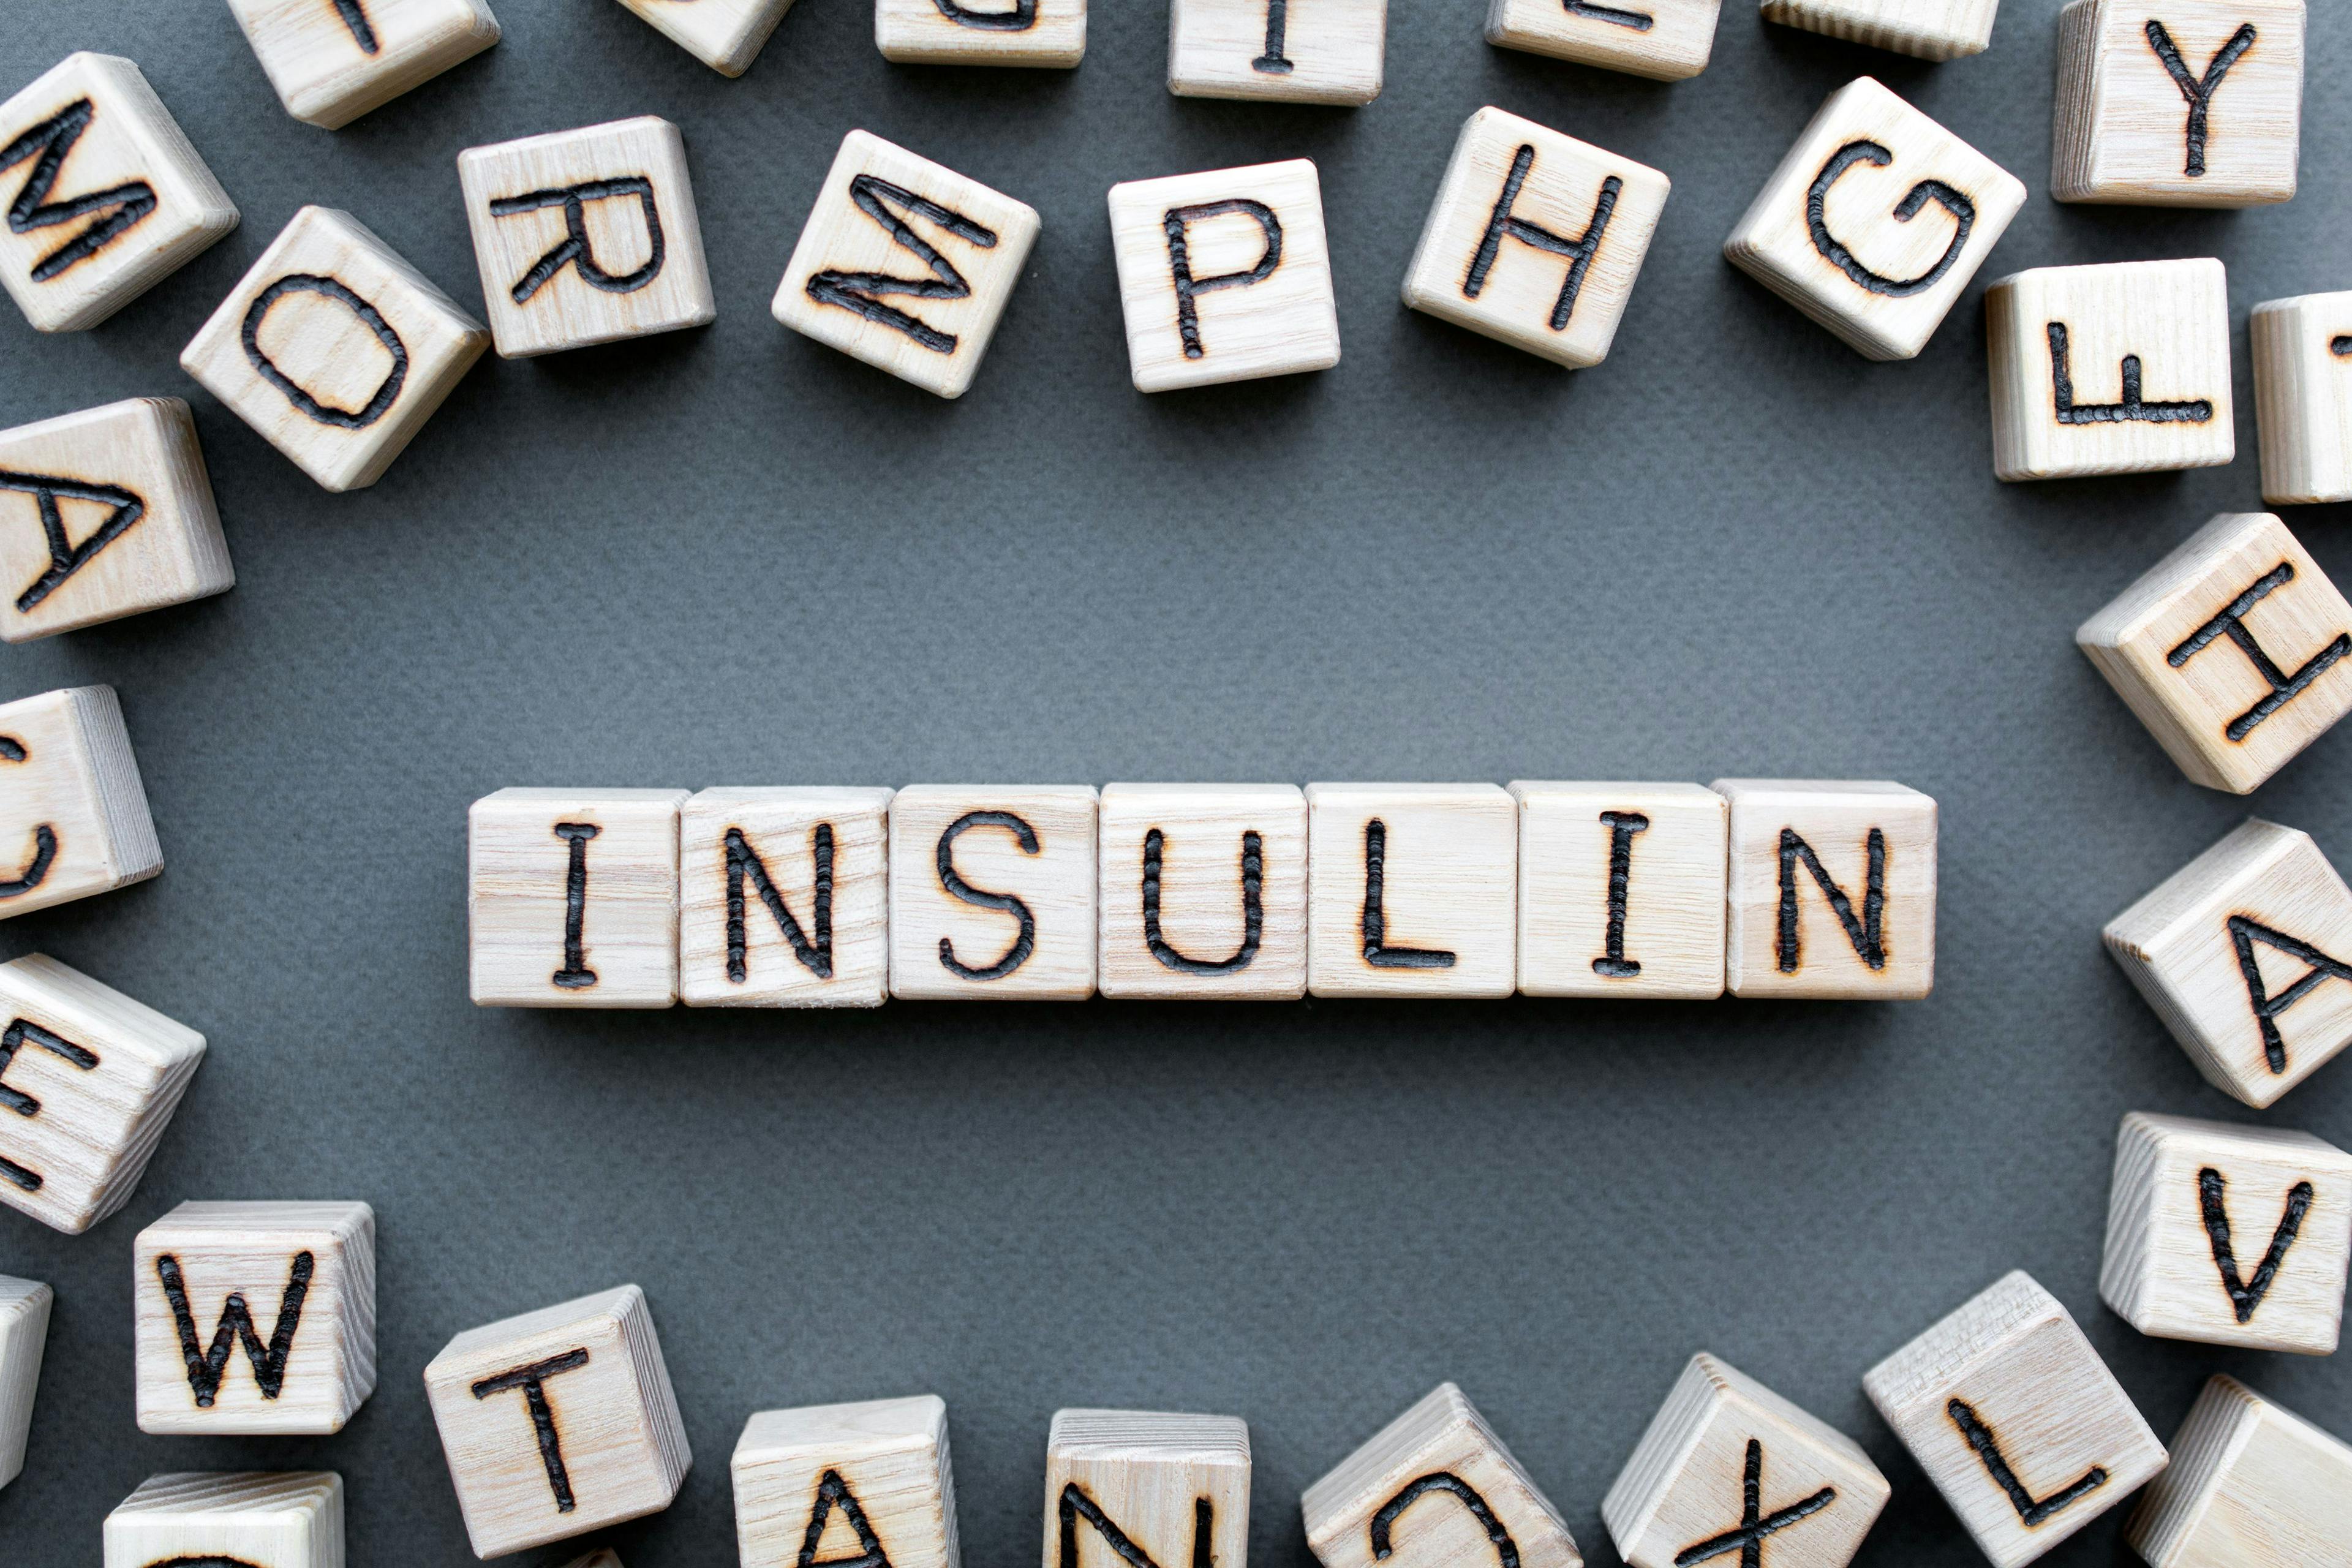 FDA clears algorithm-based automated insulin dosing system for T1D patients 6 years and up | Image Credit: © SecondSide - © SecondSide - stock.adobe.com.